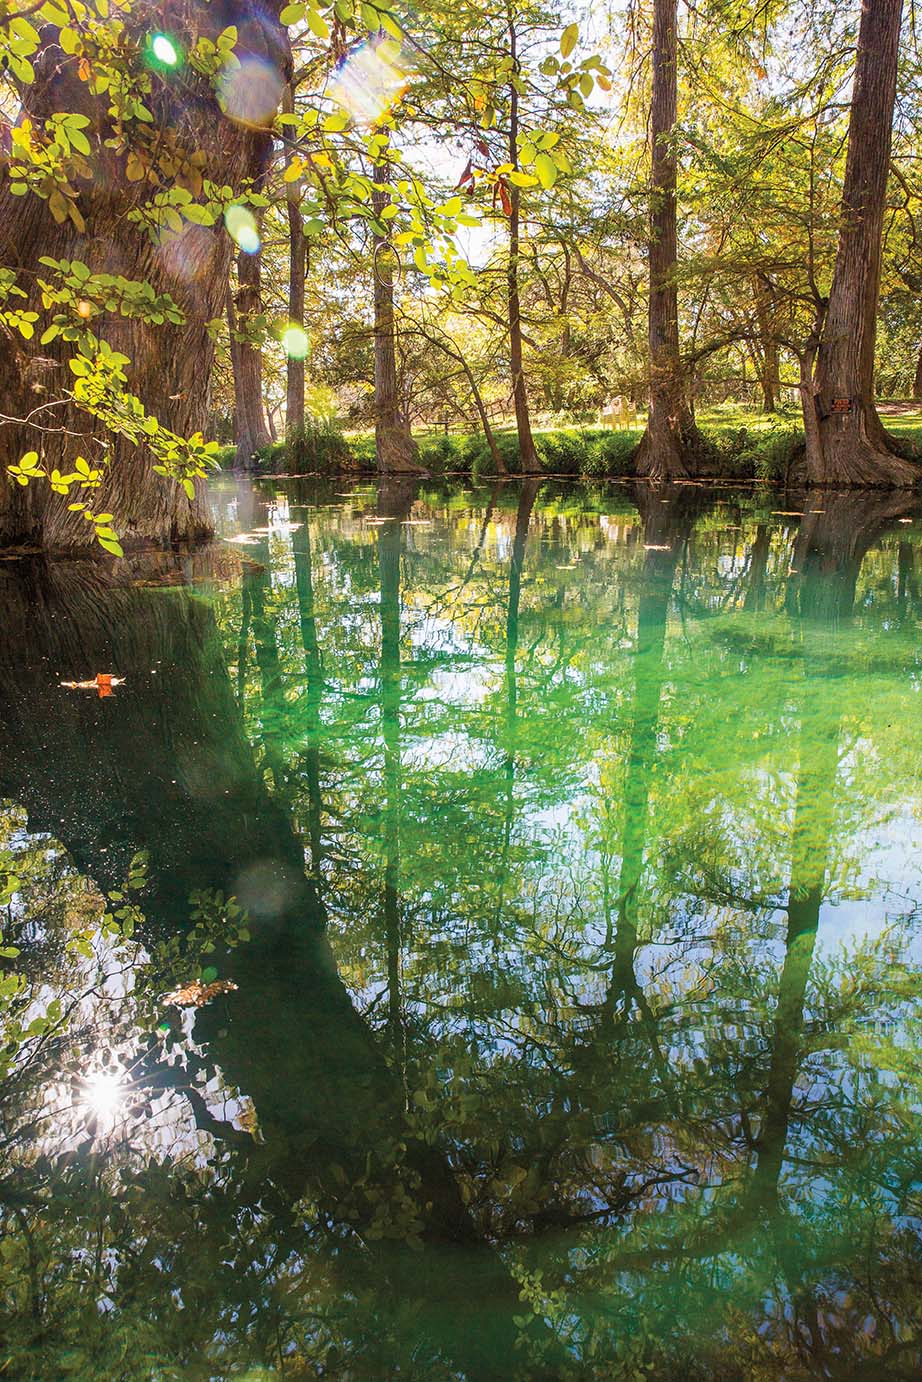 Cypress trees along the still blue-green waters of a creek.